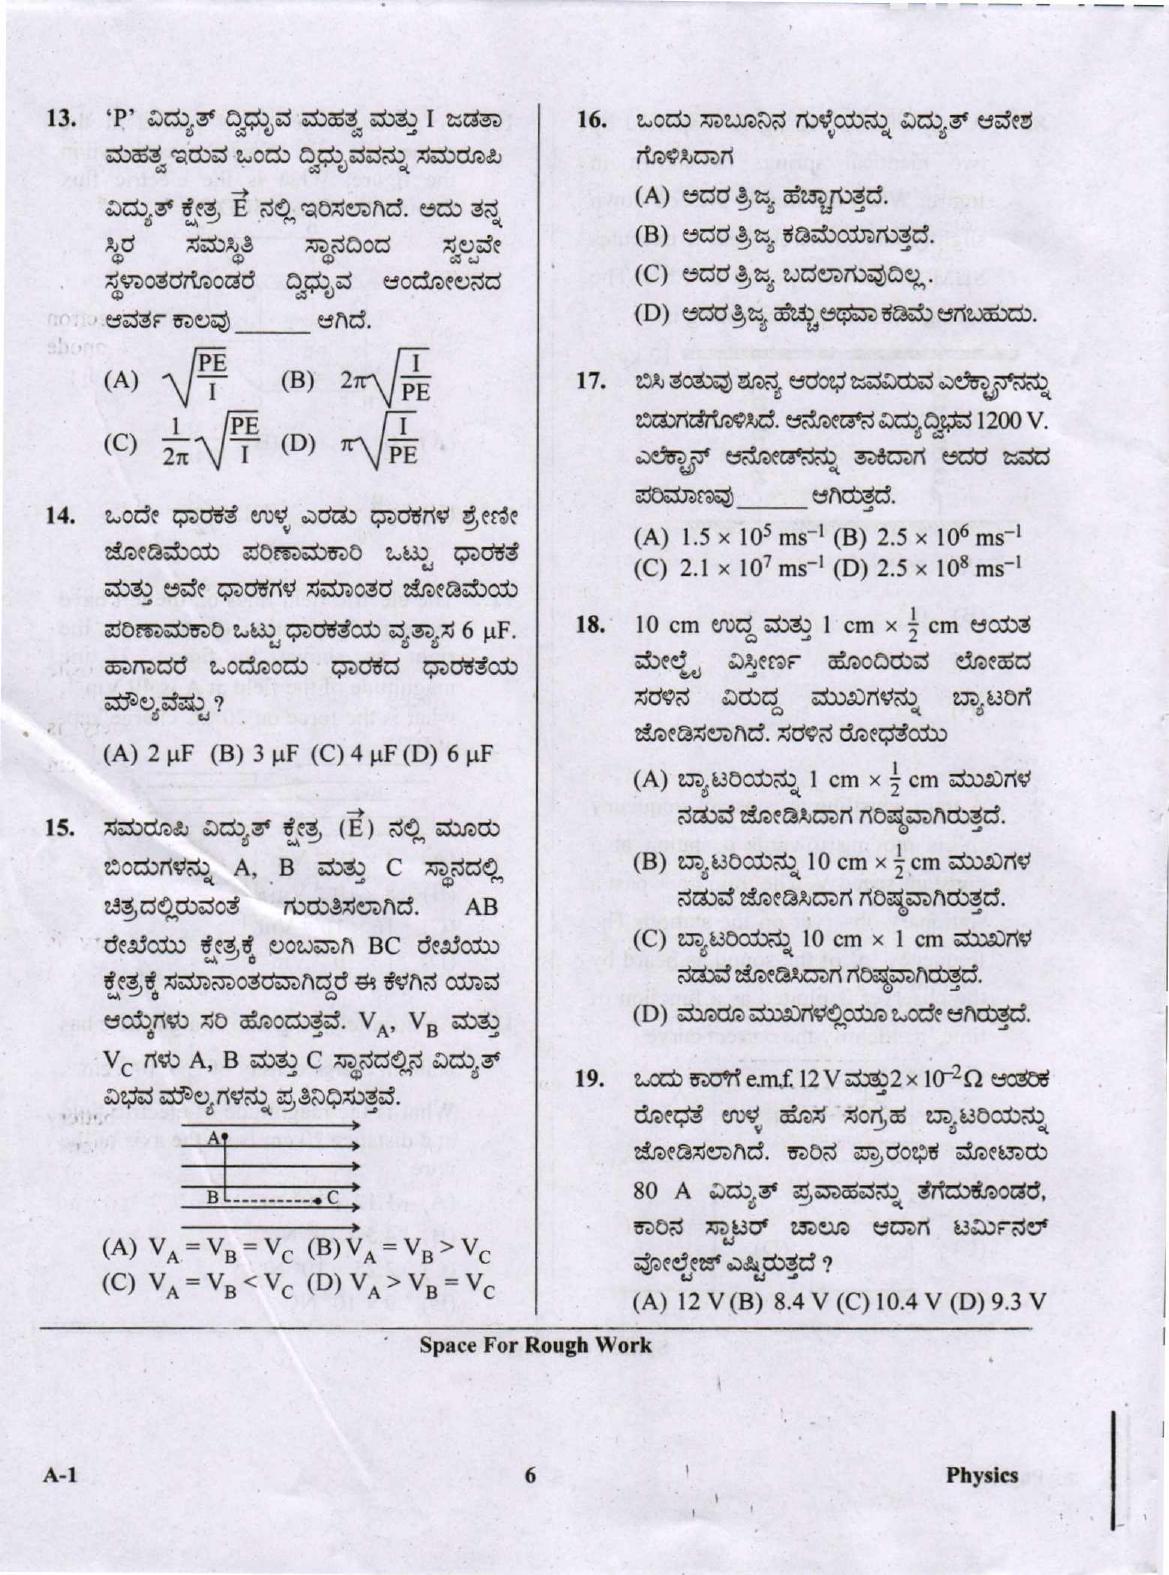 KCET Physics 2020 Question Papers - Page 6